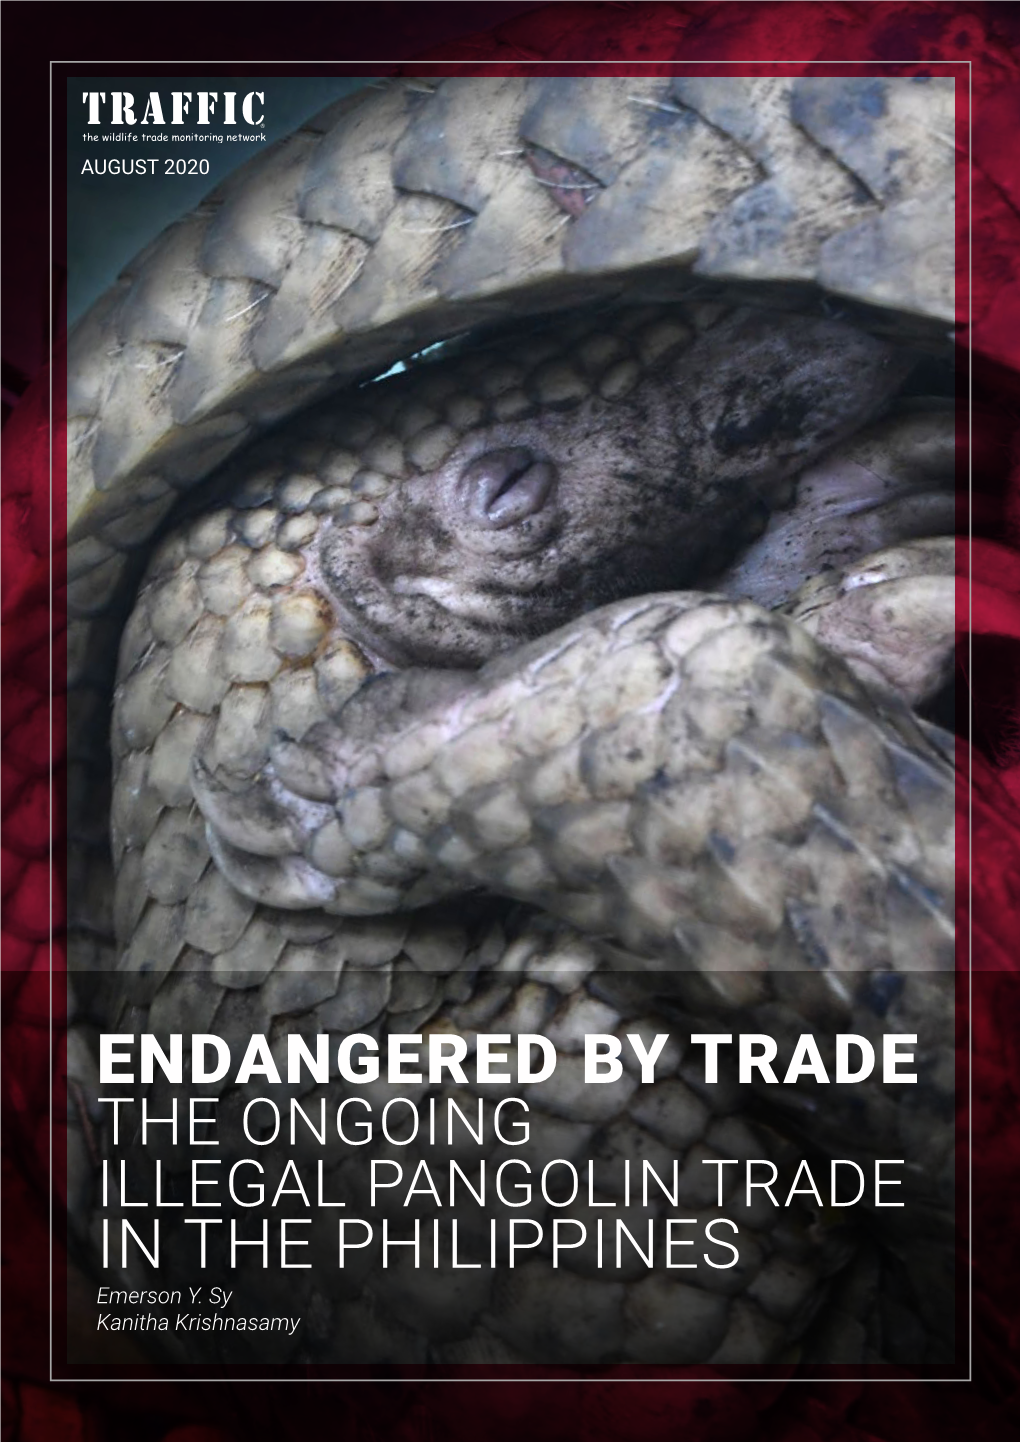 Endangered by Trade in the Philippines